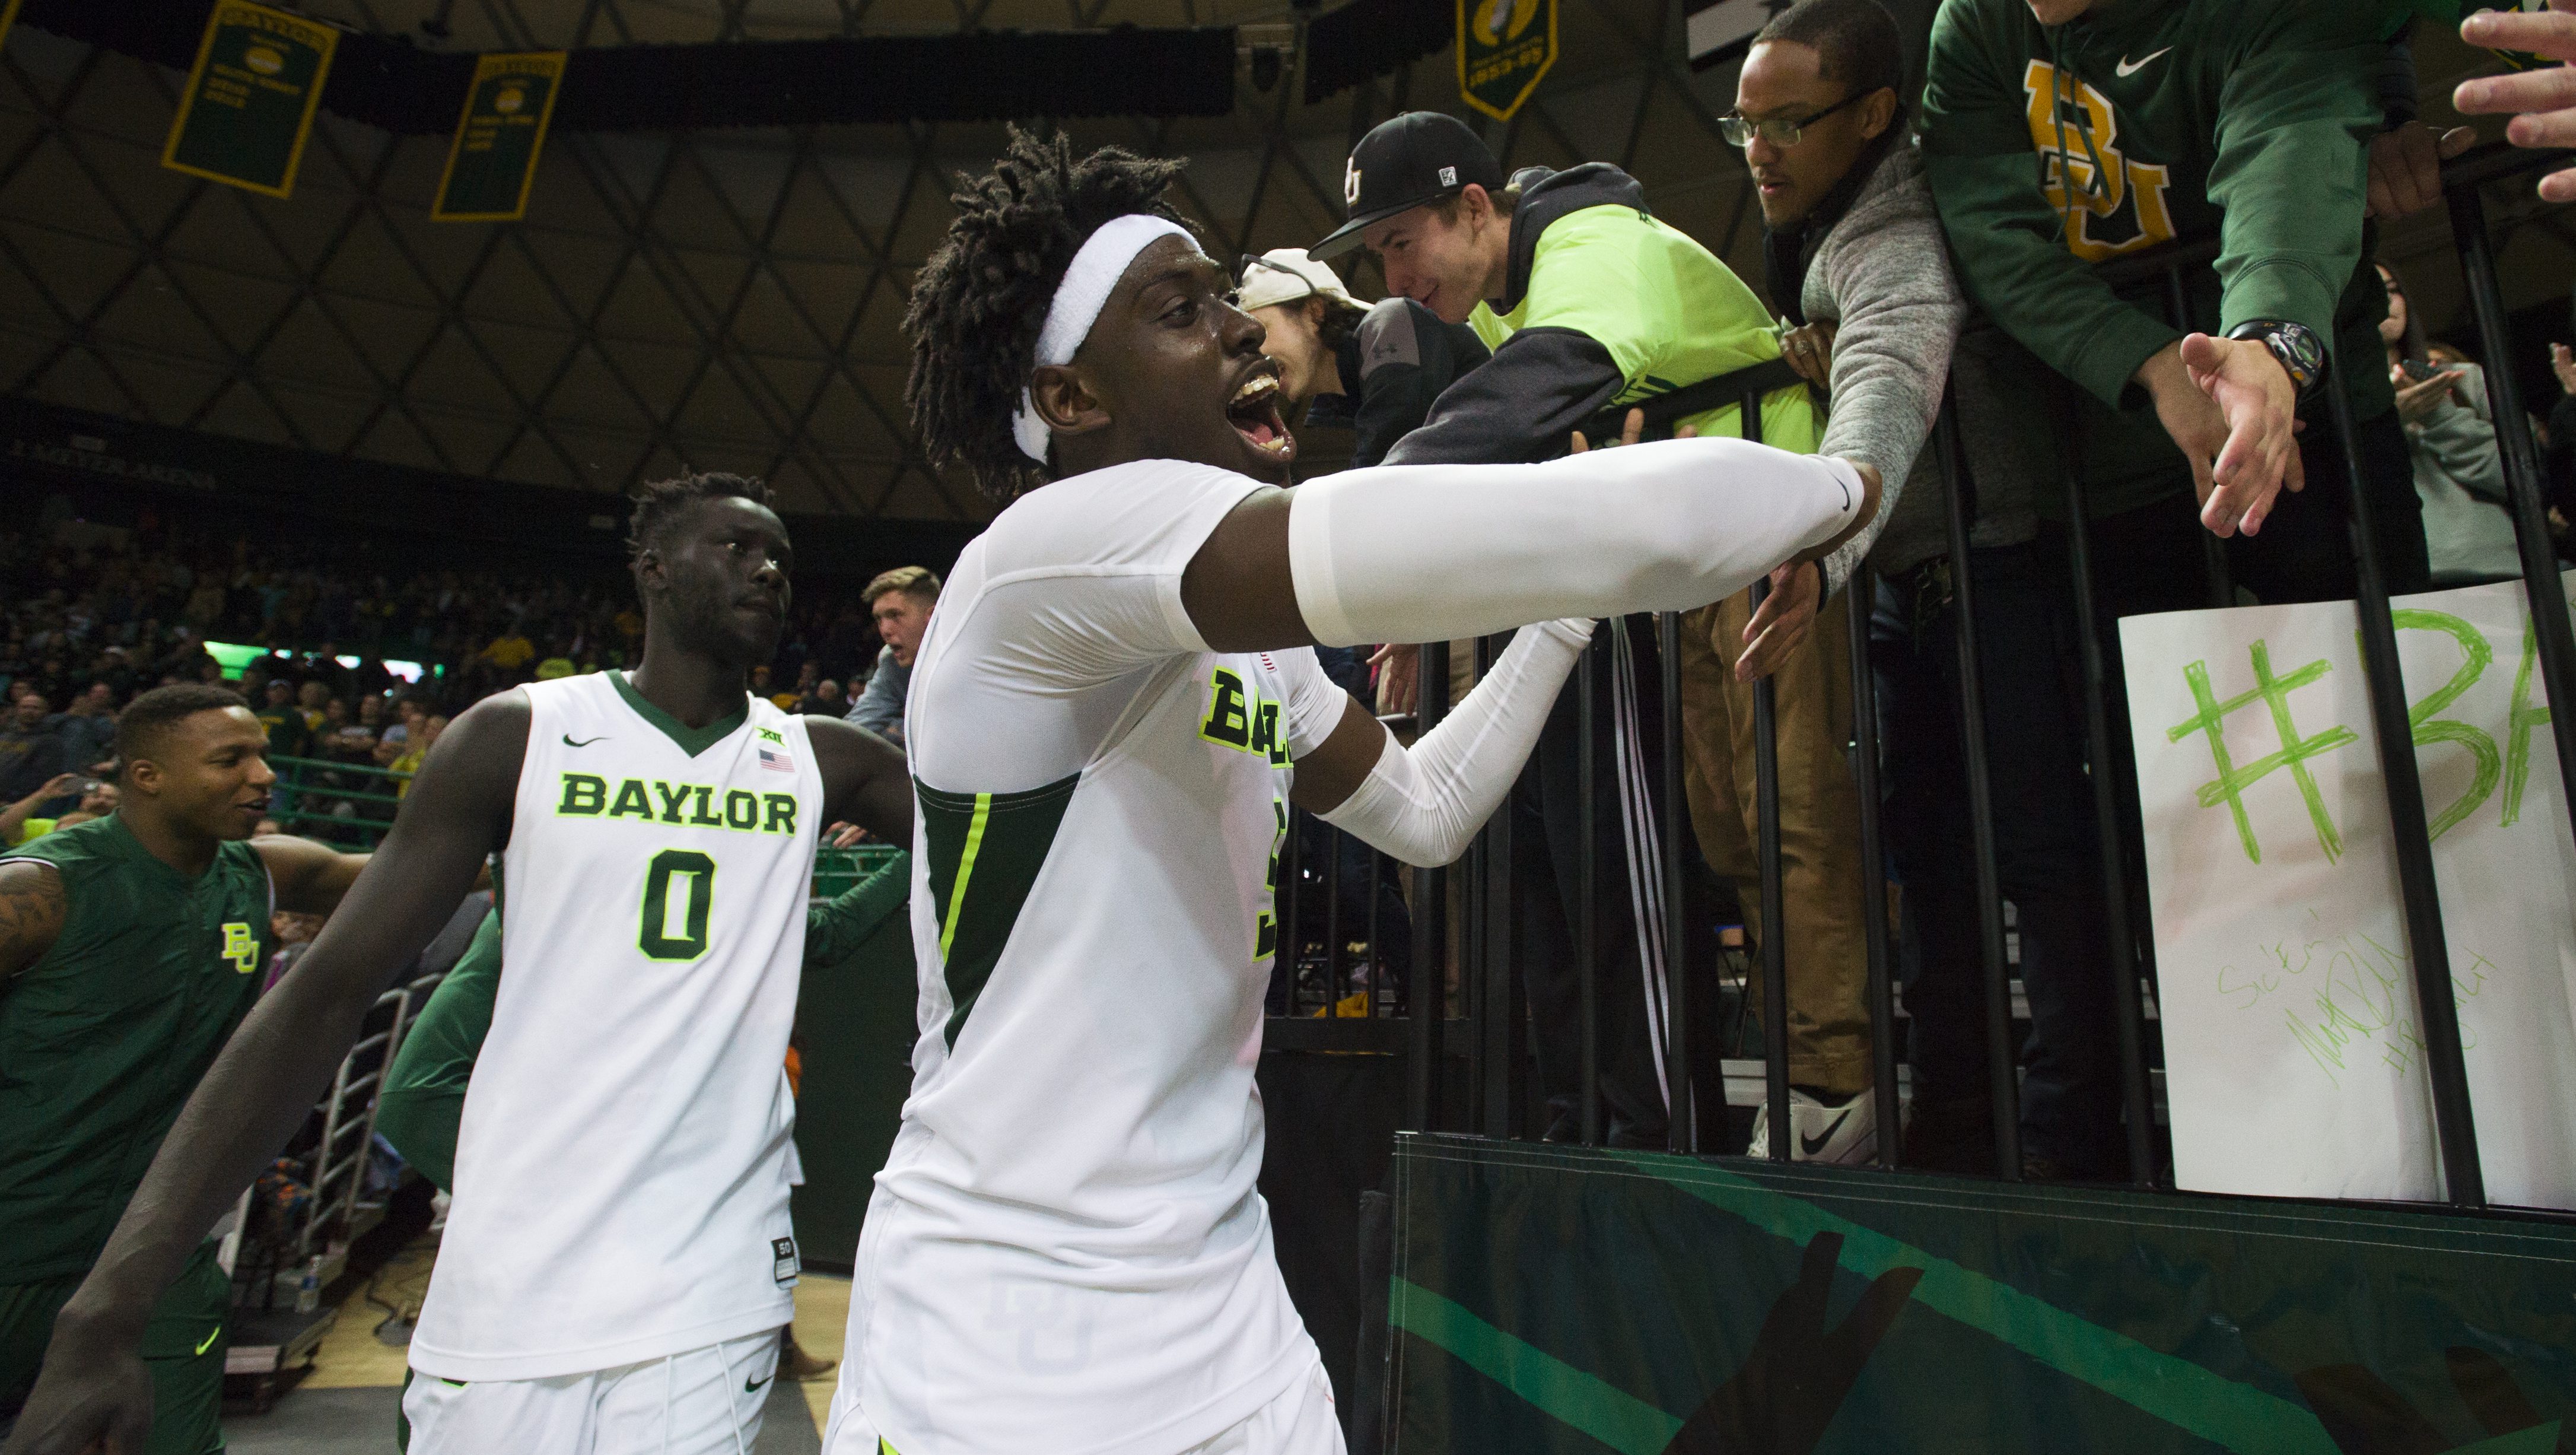 WACO, TX - JANUARY 7: Johnathan Motley #5 and Jo Lual-Acuil Jr. #0 of the Baylor Bears celebrate after defeating the Oklahoma State Cowboys 61-57 on January 7, 2017 at the Ferrell Center in Waco, Texas.  (Photo by Cooper Neill/Getty Images)